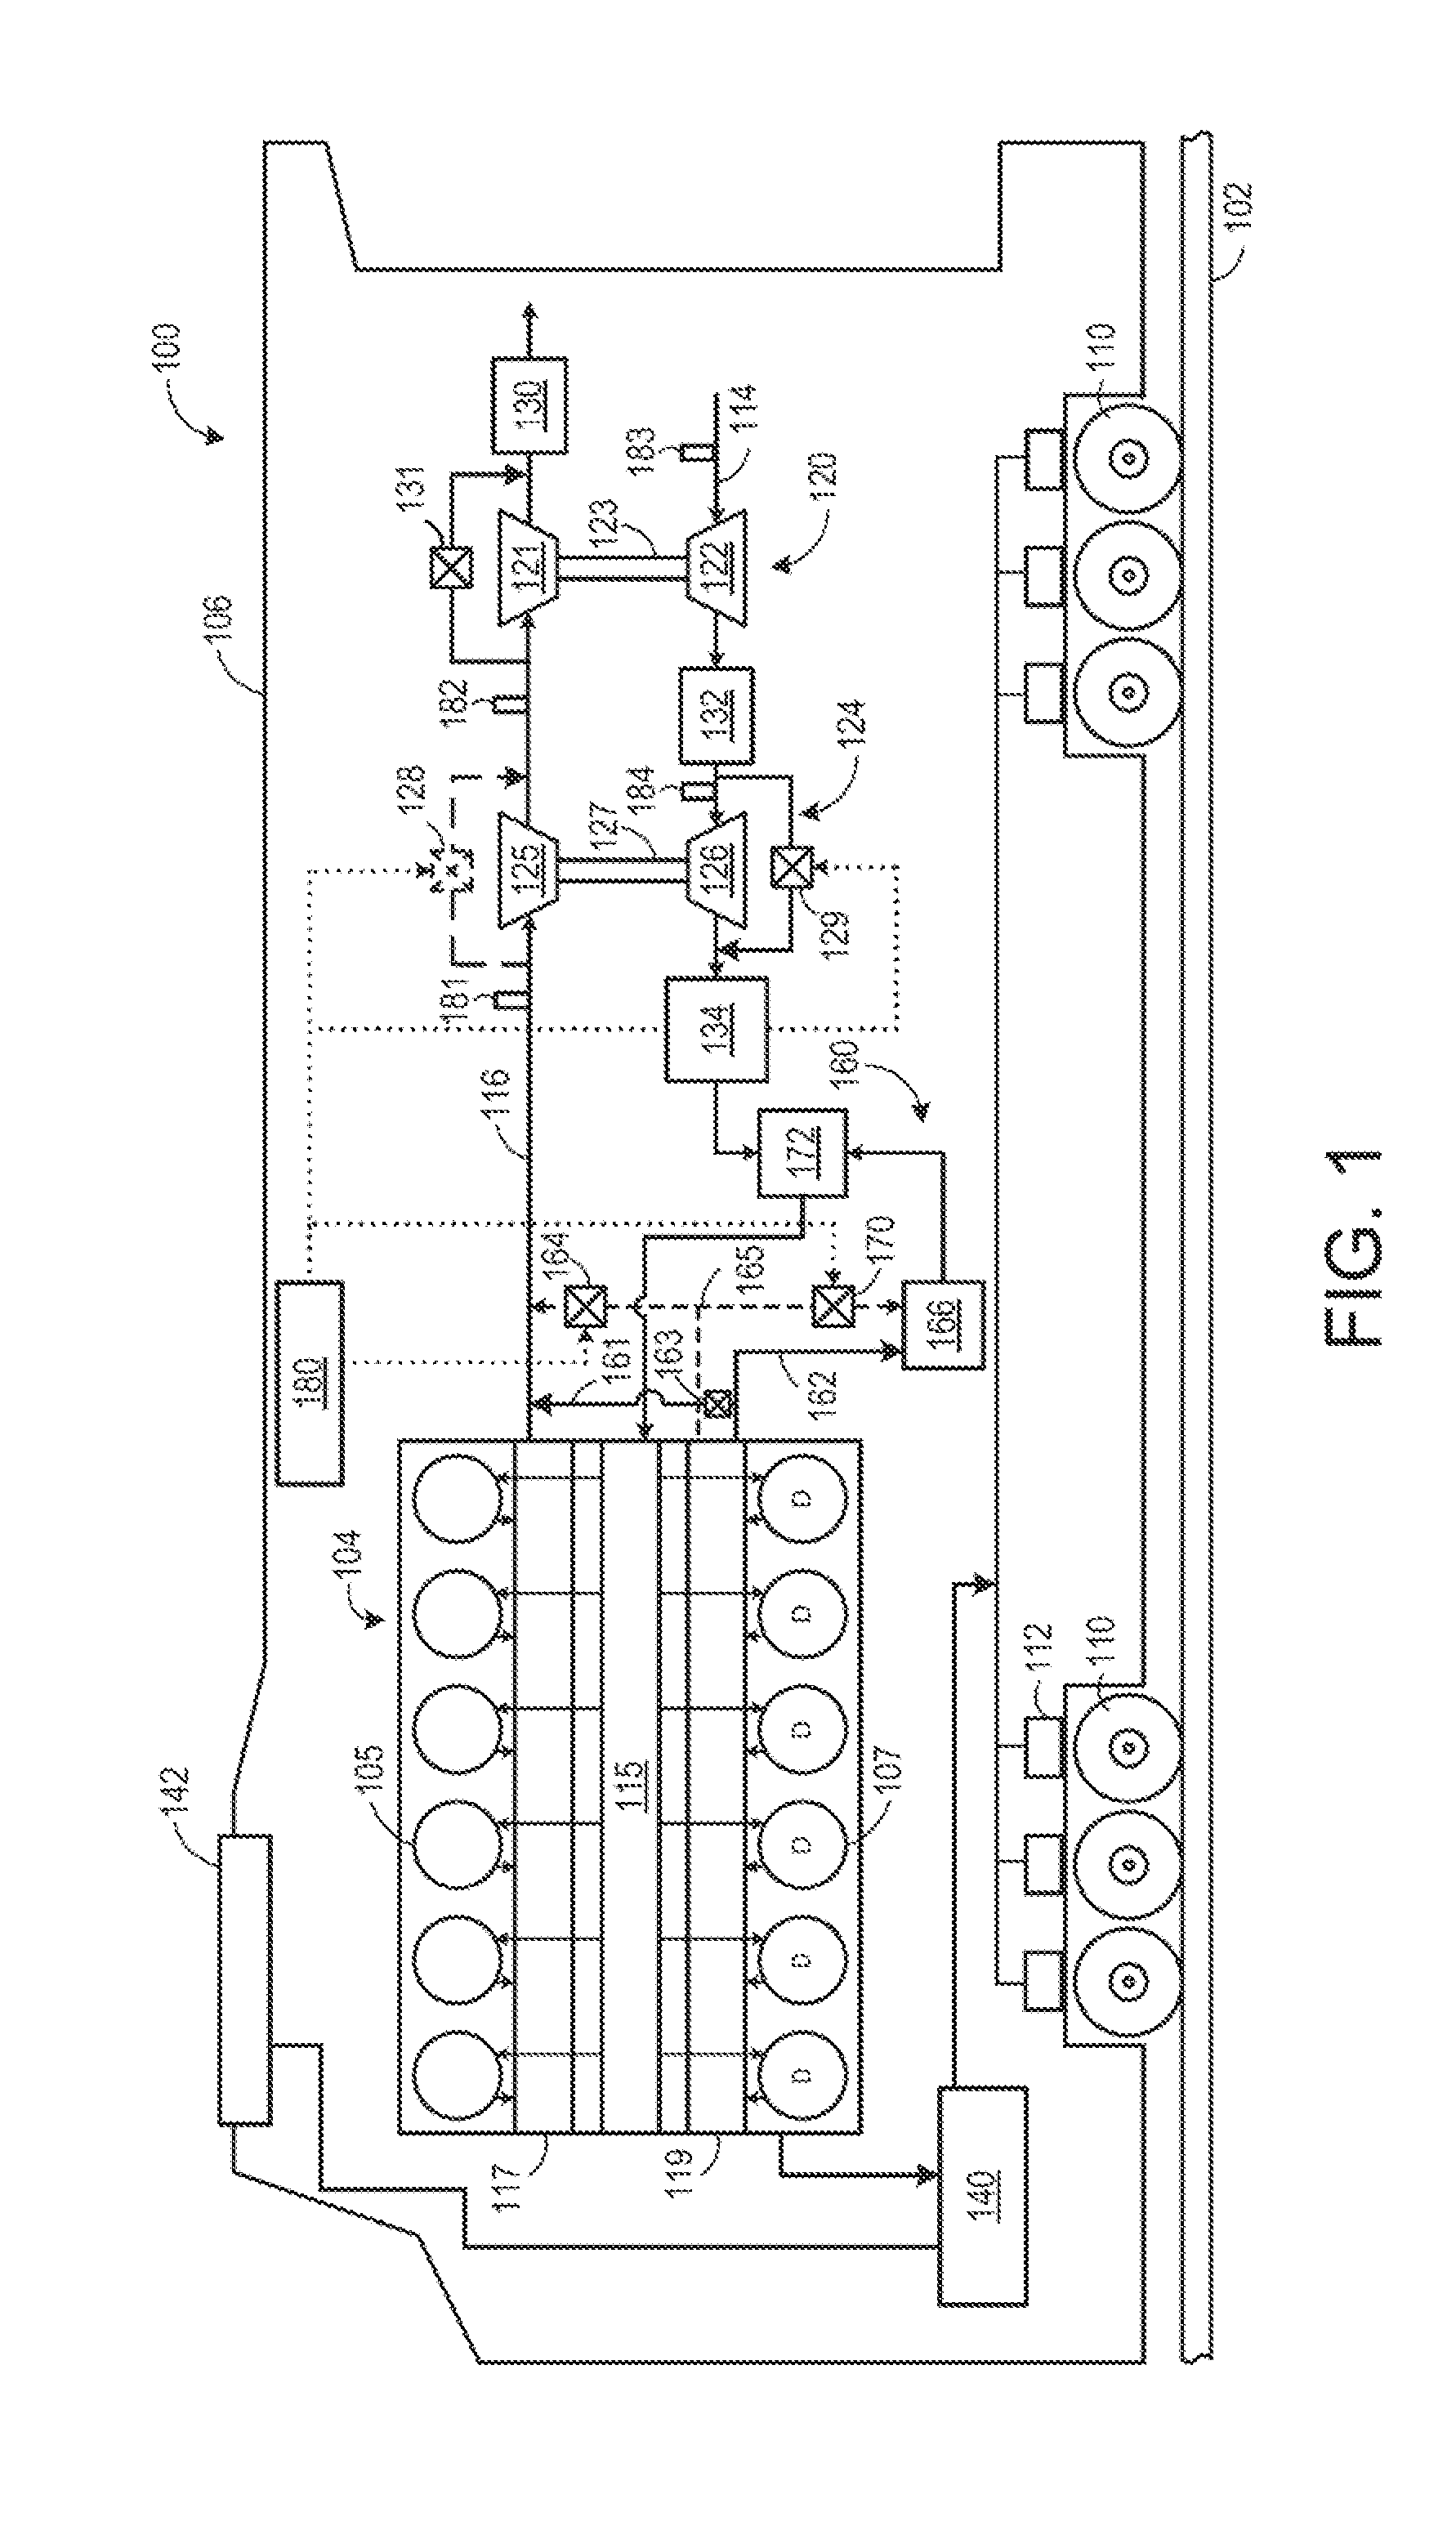 Methods and system to prevent exhaust overheating